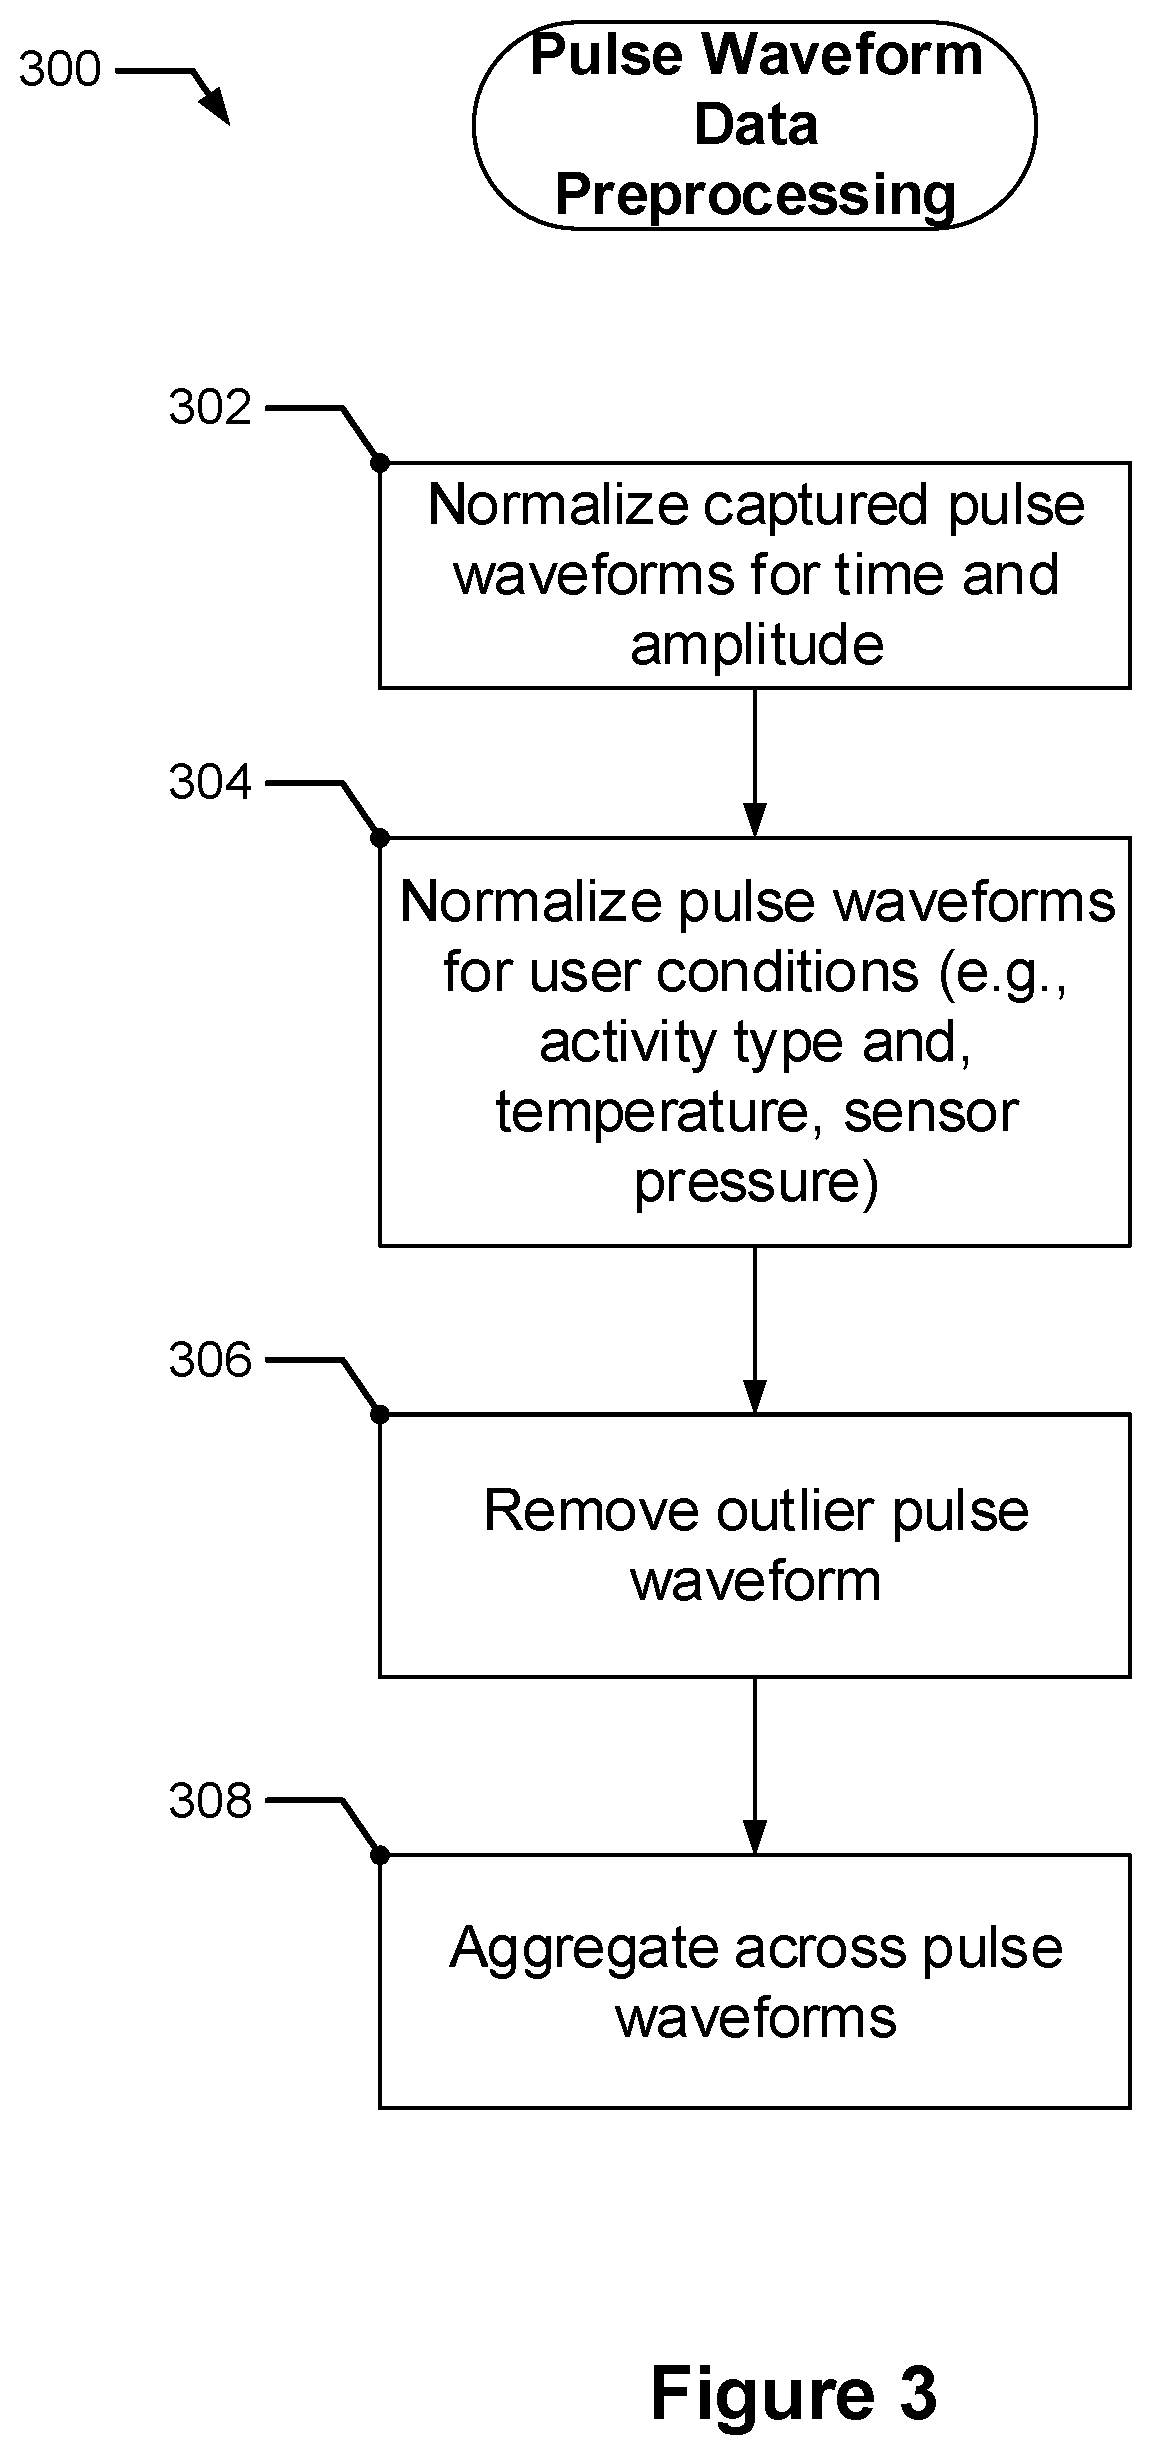 Photoplethysmography-based pulse wave analysis using a wearable device